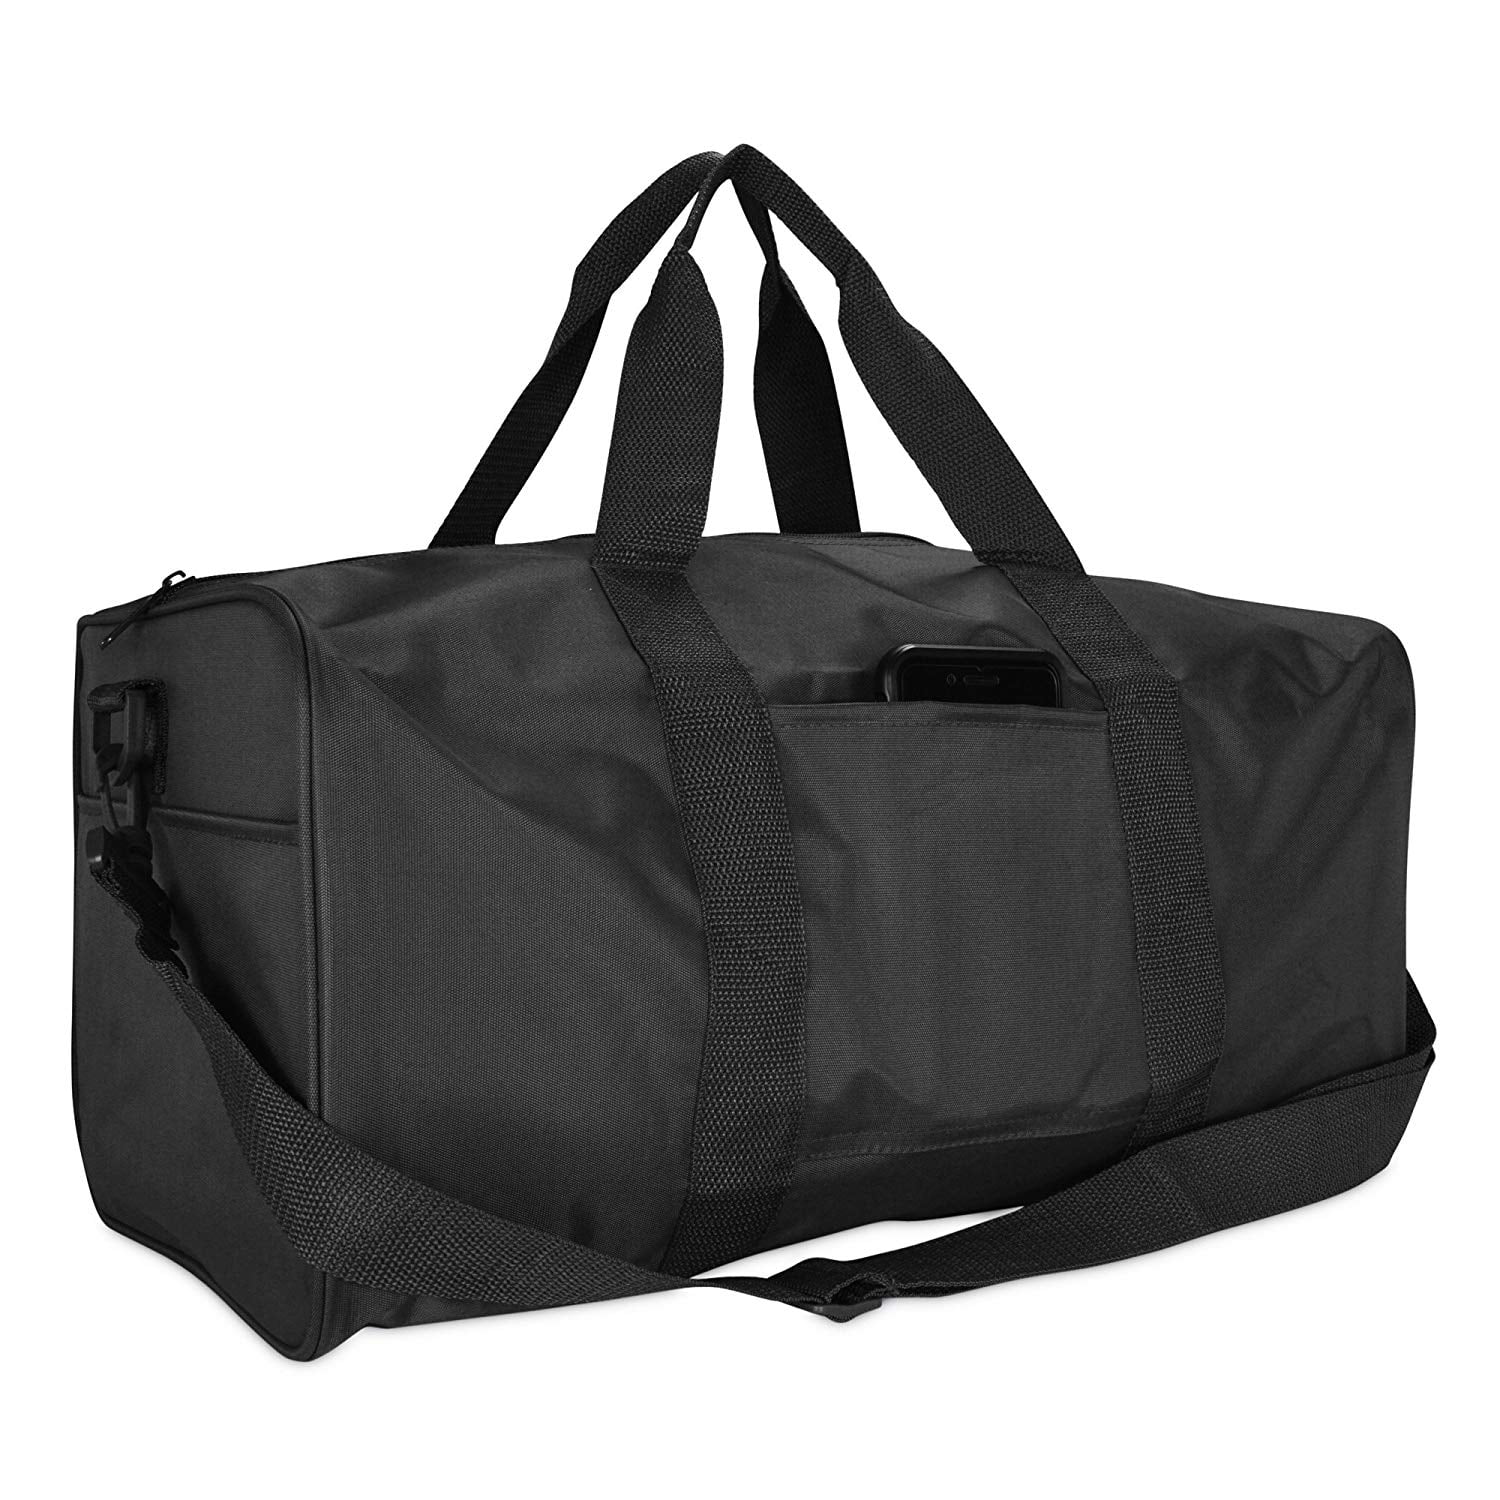 19&quot; ImpecGear Duffle Bag Travel Sports Gym Nylon Square Strap Carry On Adjustable Bag (Black ...